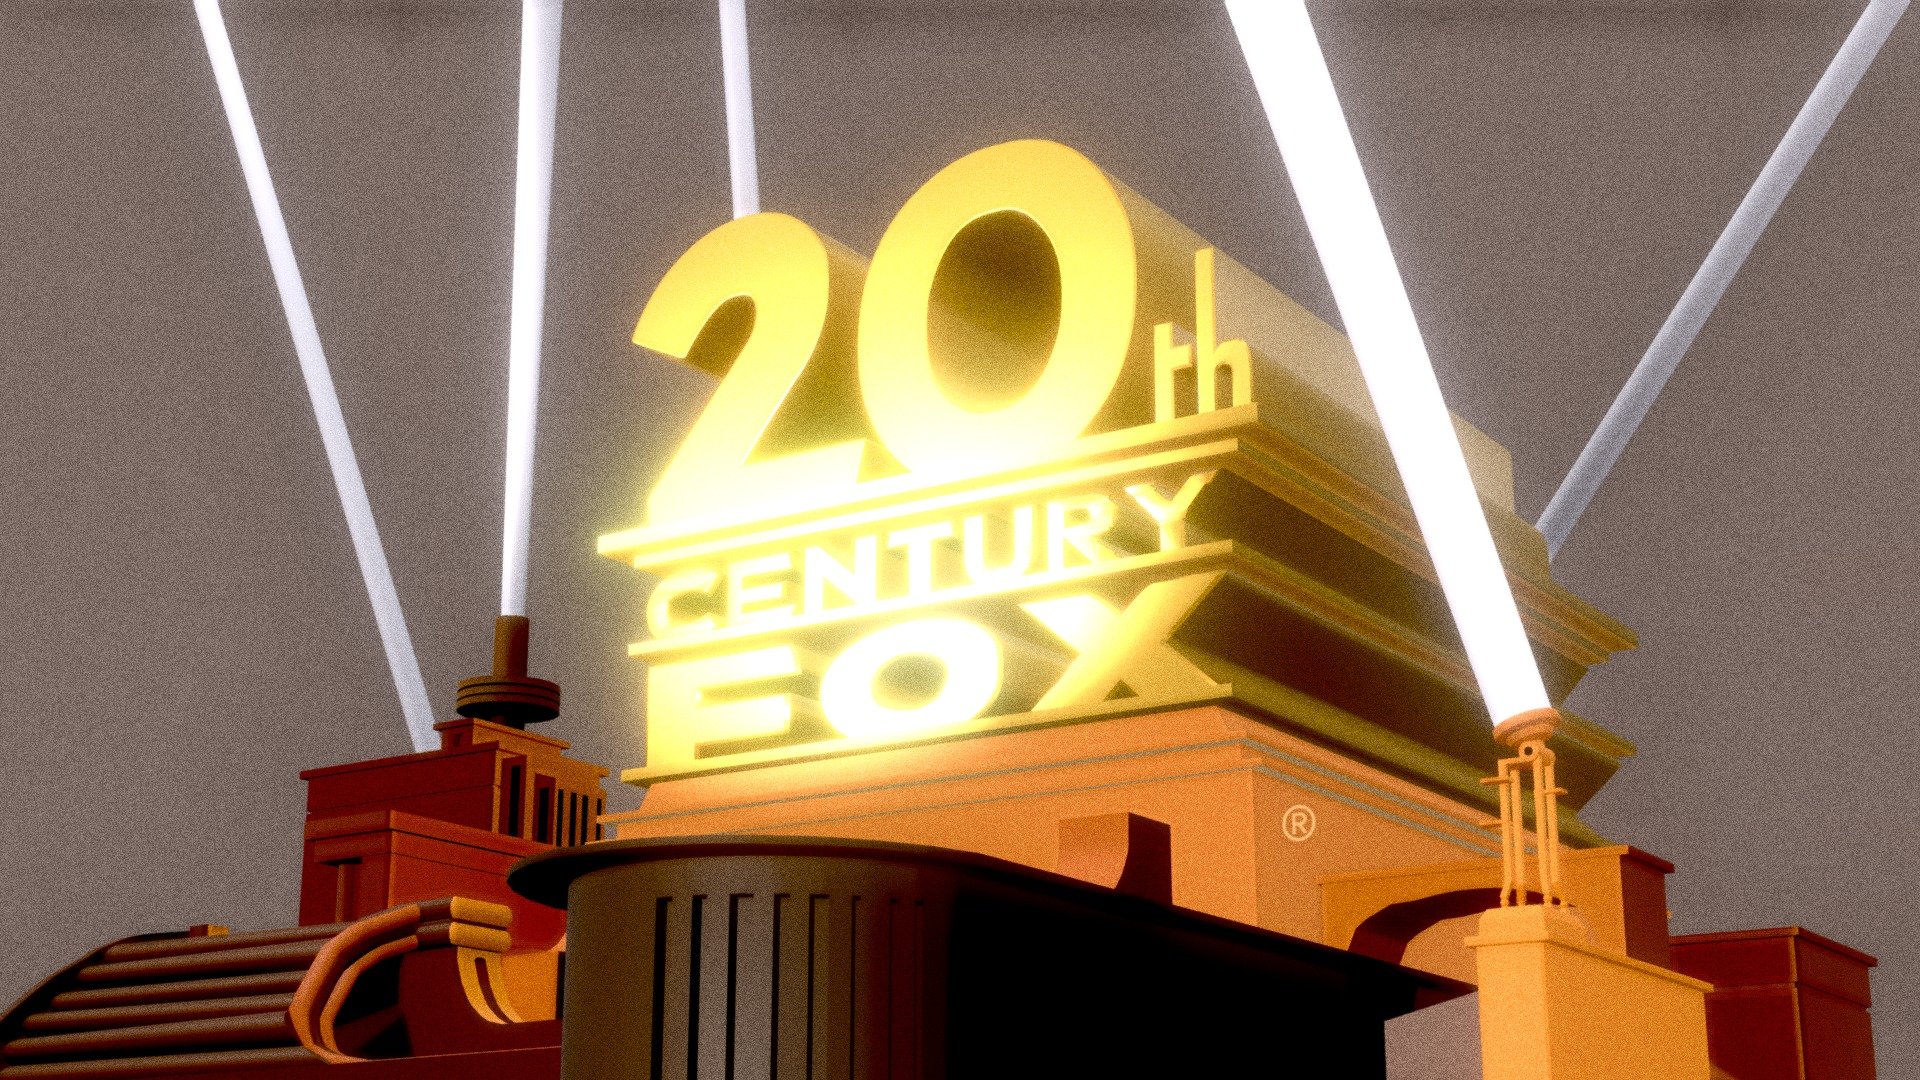 20th Century Fox (1994) - Download Free 3D model by